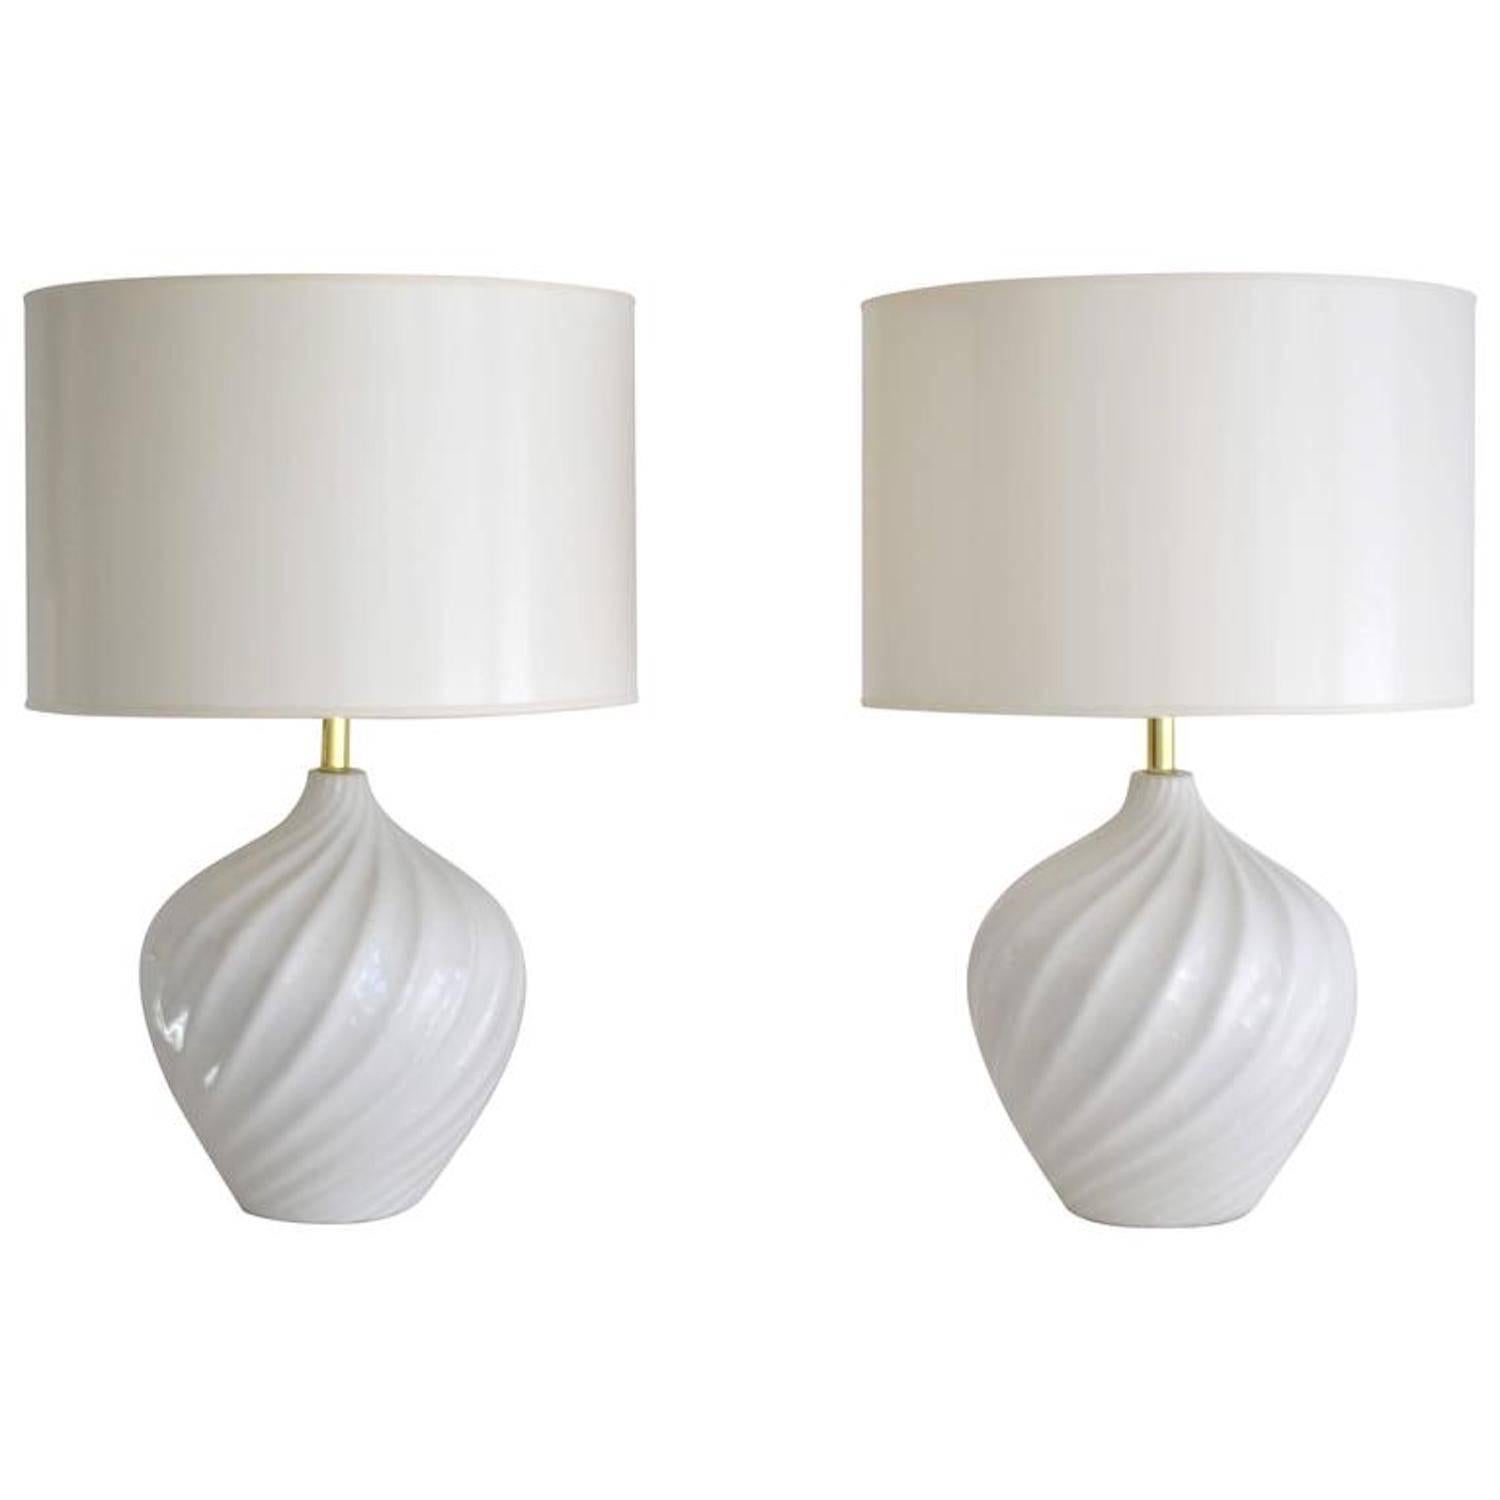 Pair of Blanc De Chine Jar Form Table Lamps For Sale